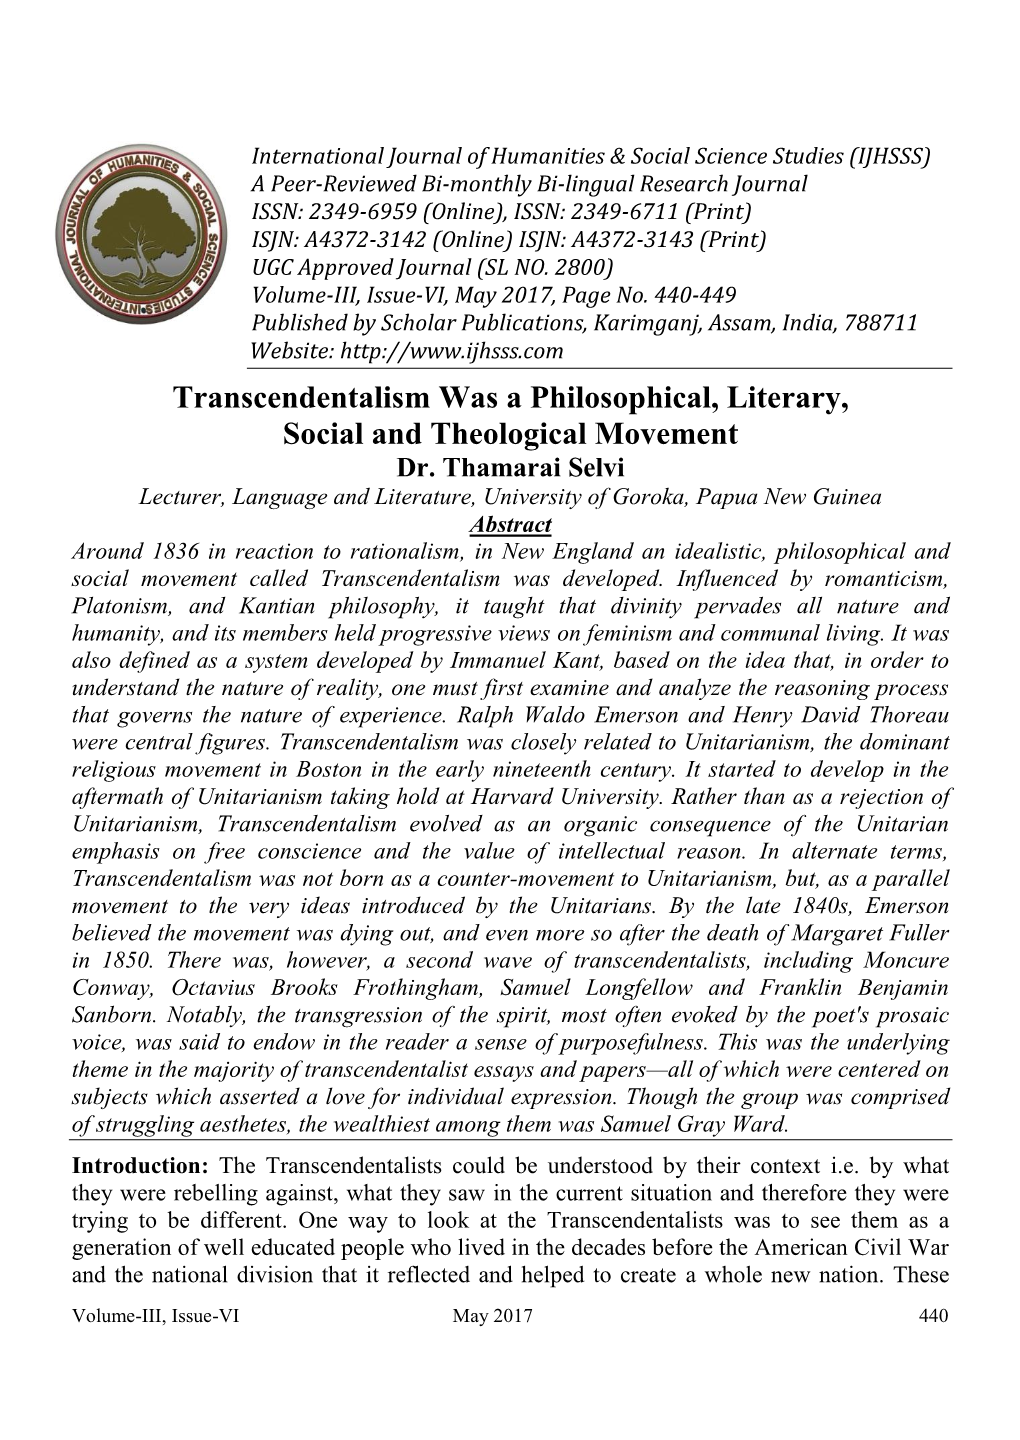 Transcendentalism Was a Philosophical, Literary, Social and Theological Movement Dr